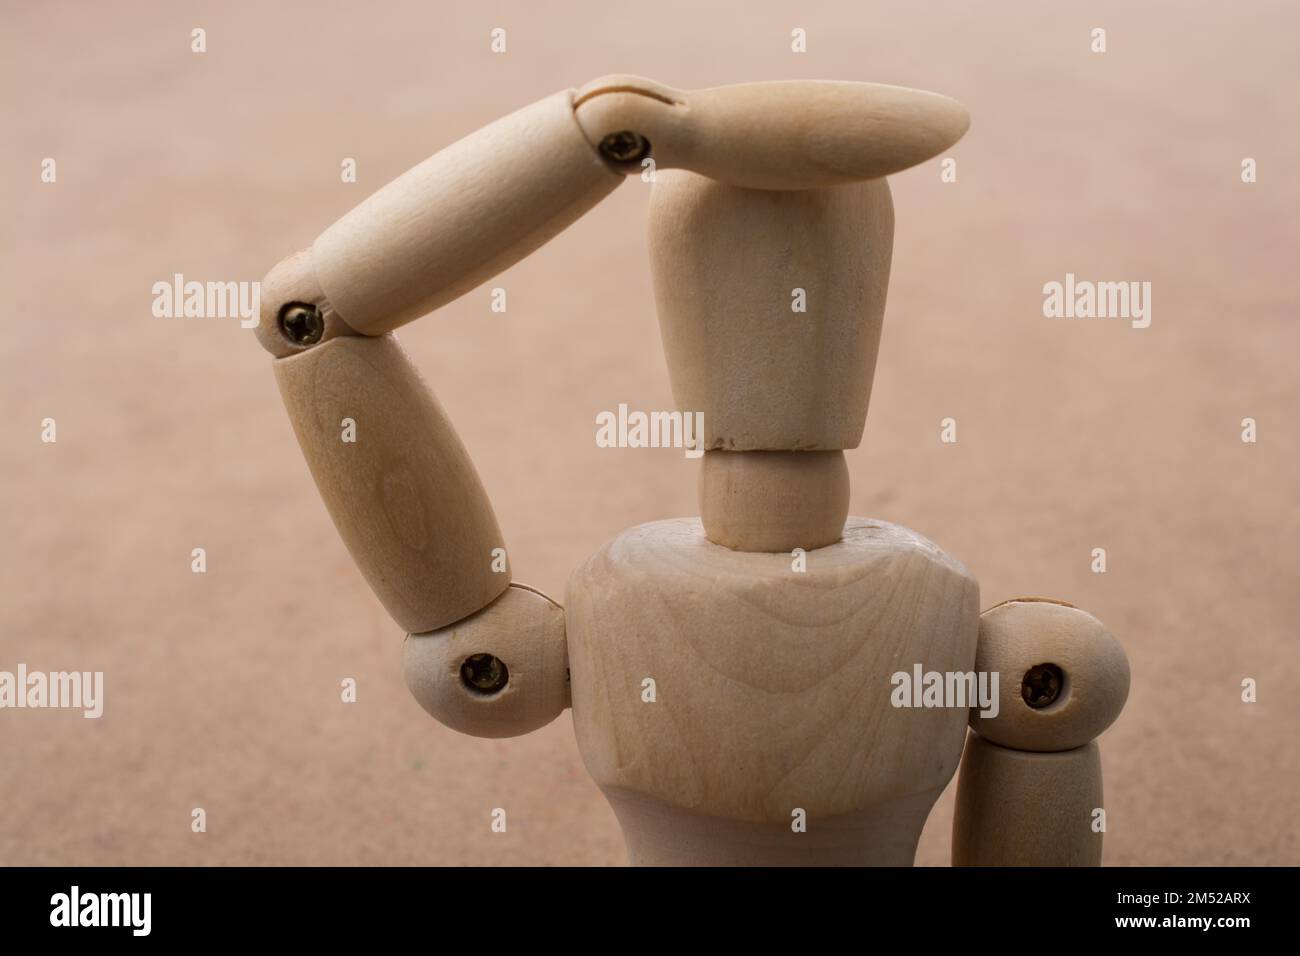 Anatomy doll making a hand gesture on a wooden background Stock Photo